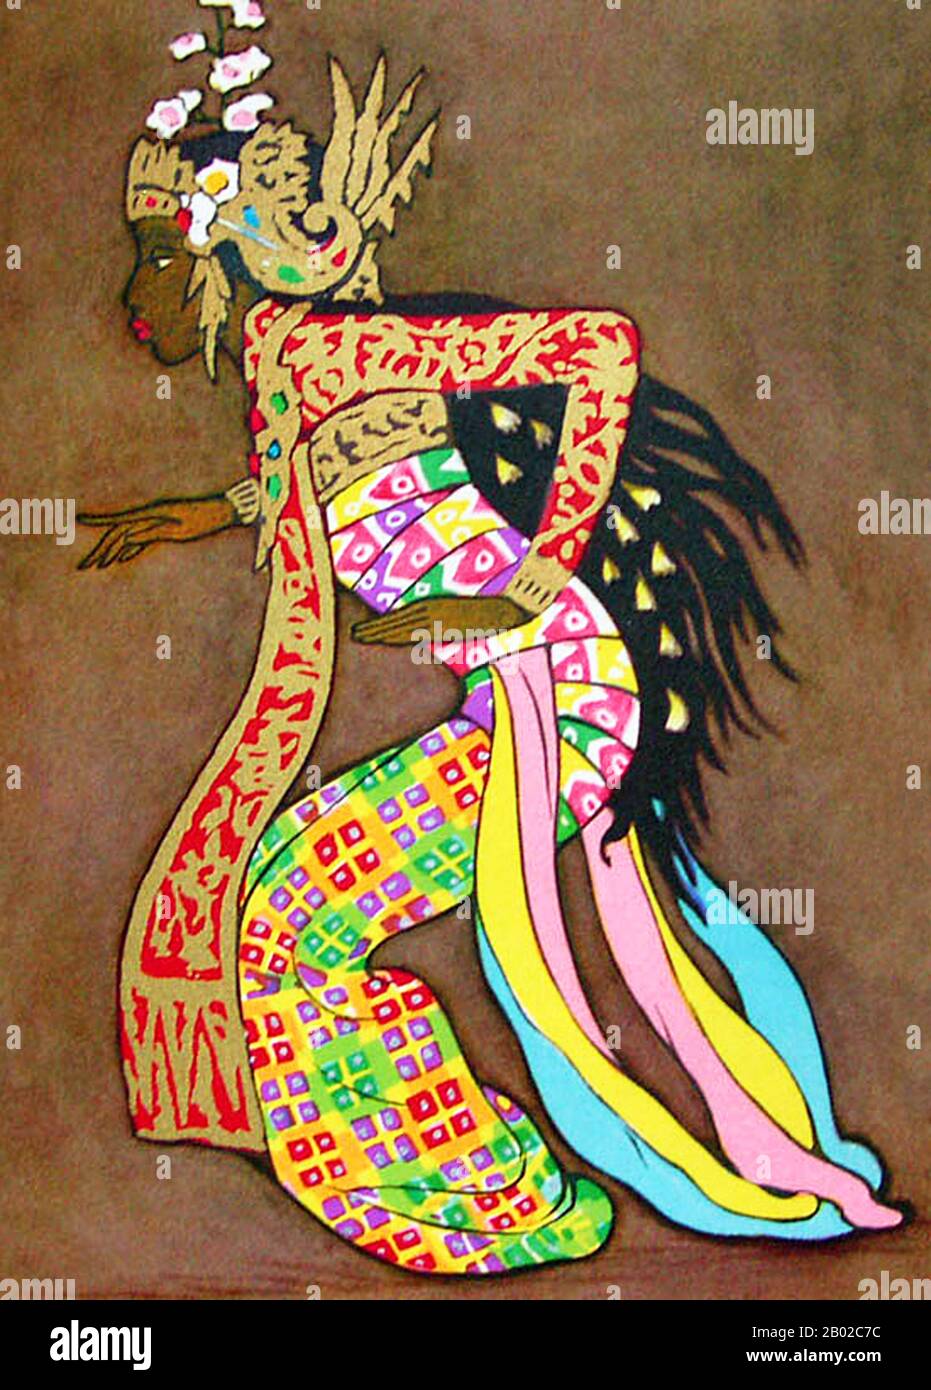 Tyra Kleen, sometimes written Thyra, born 29 March 1874 in Stockholm, died in 1951, was a Swedish artist and writer. Her illustrations can be signed T.Kn.  Balinese dance is a very ancient dance tradition that is a part of the religious and artistic expression among the Balinese people, native to Bali island, Indonesia. Balinese dance is dynamic, angular and intensely expressive. The Balinese dancers express the story of dance-drama through the whole bodily gestures; fingers, hands and body gestures to head and eyes movements.  There is a great richness of dance forms and styles in Bali; and p Stock Photo